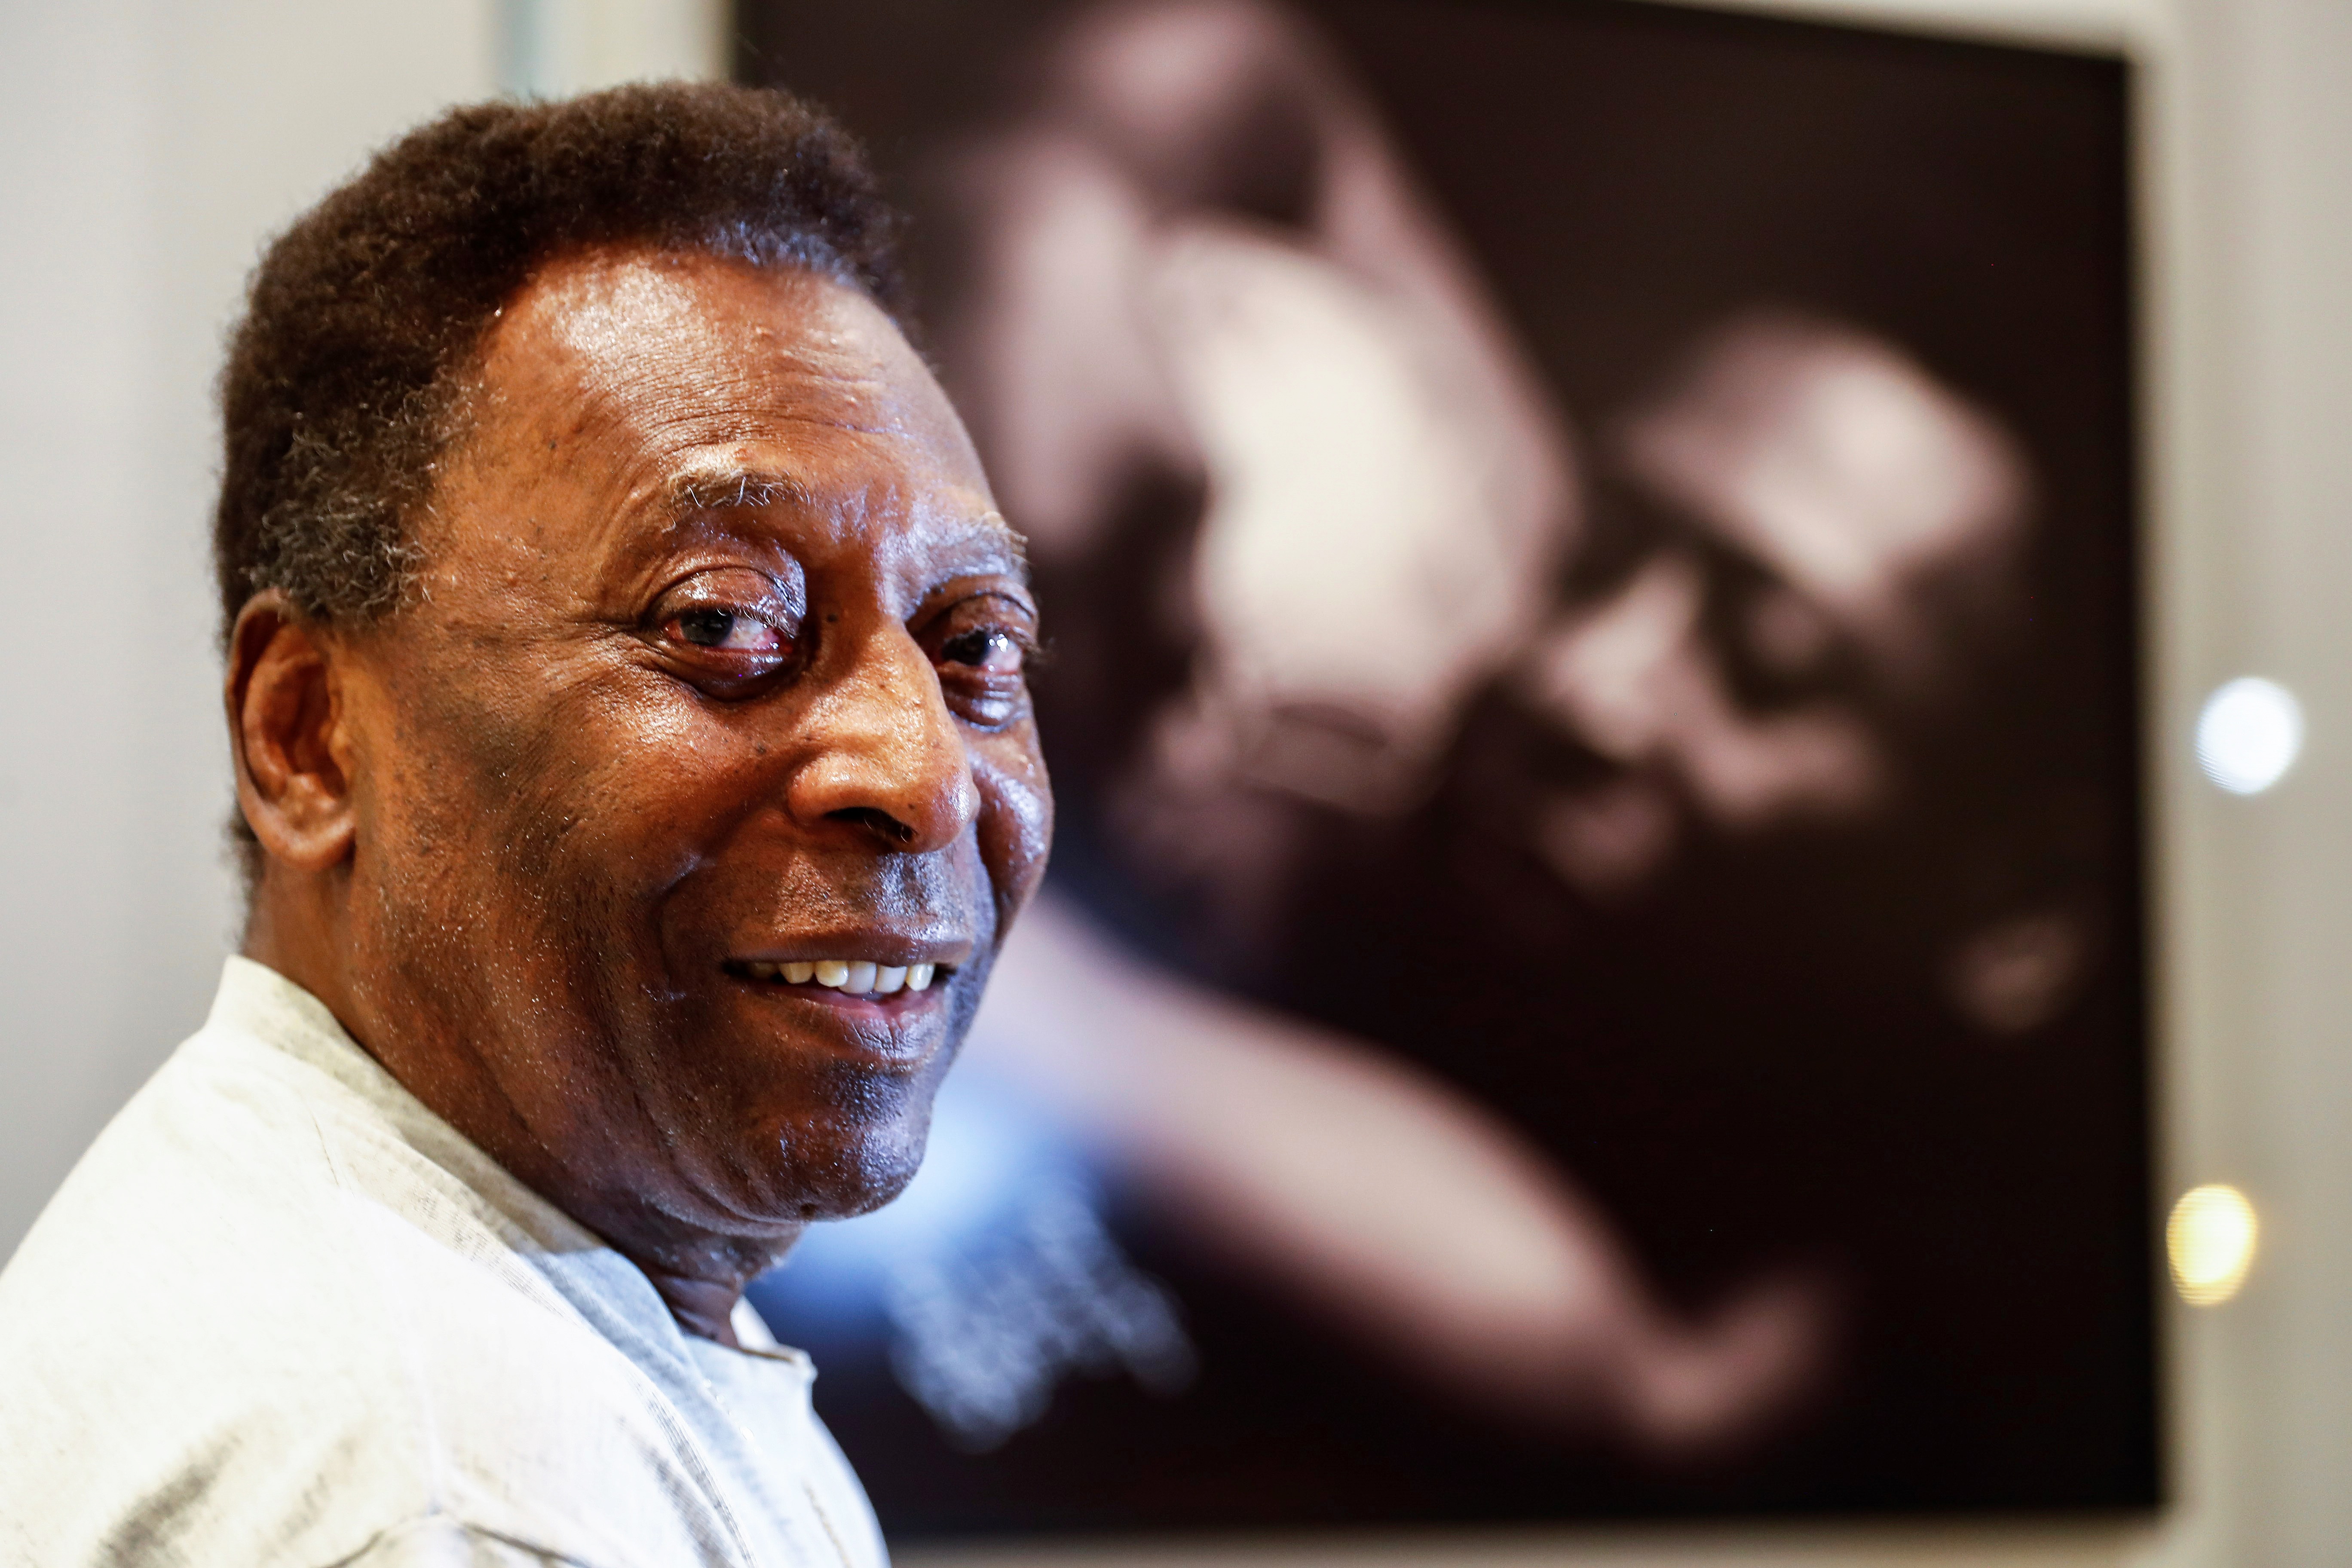 Pele, Brazil’s sublimely skilled soccer star who charmed the world, dead at 82